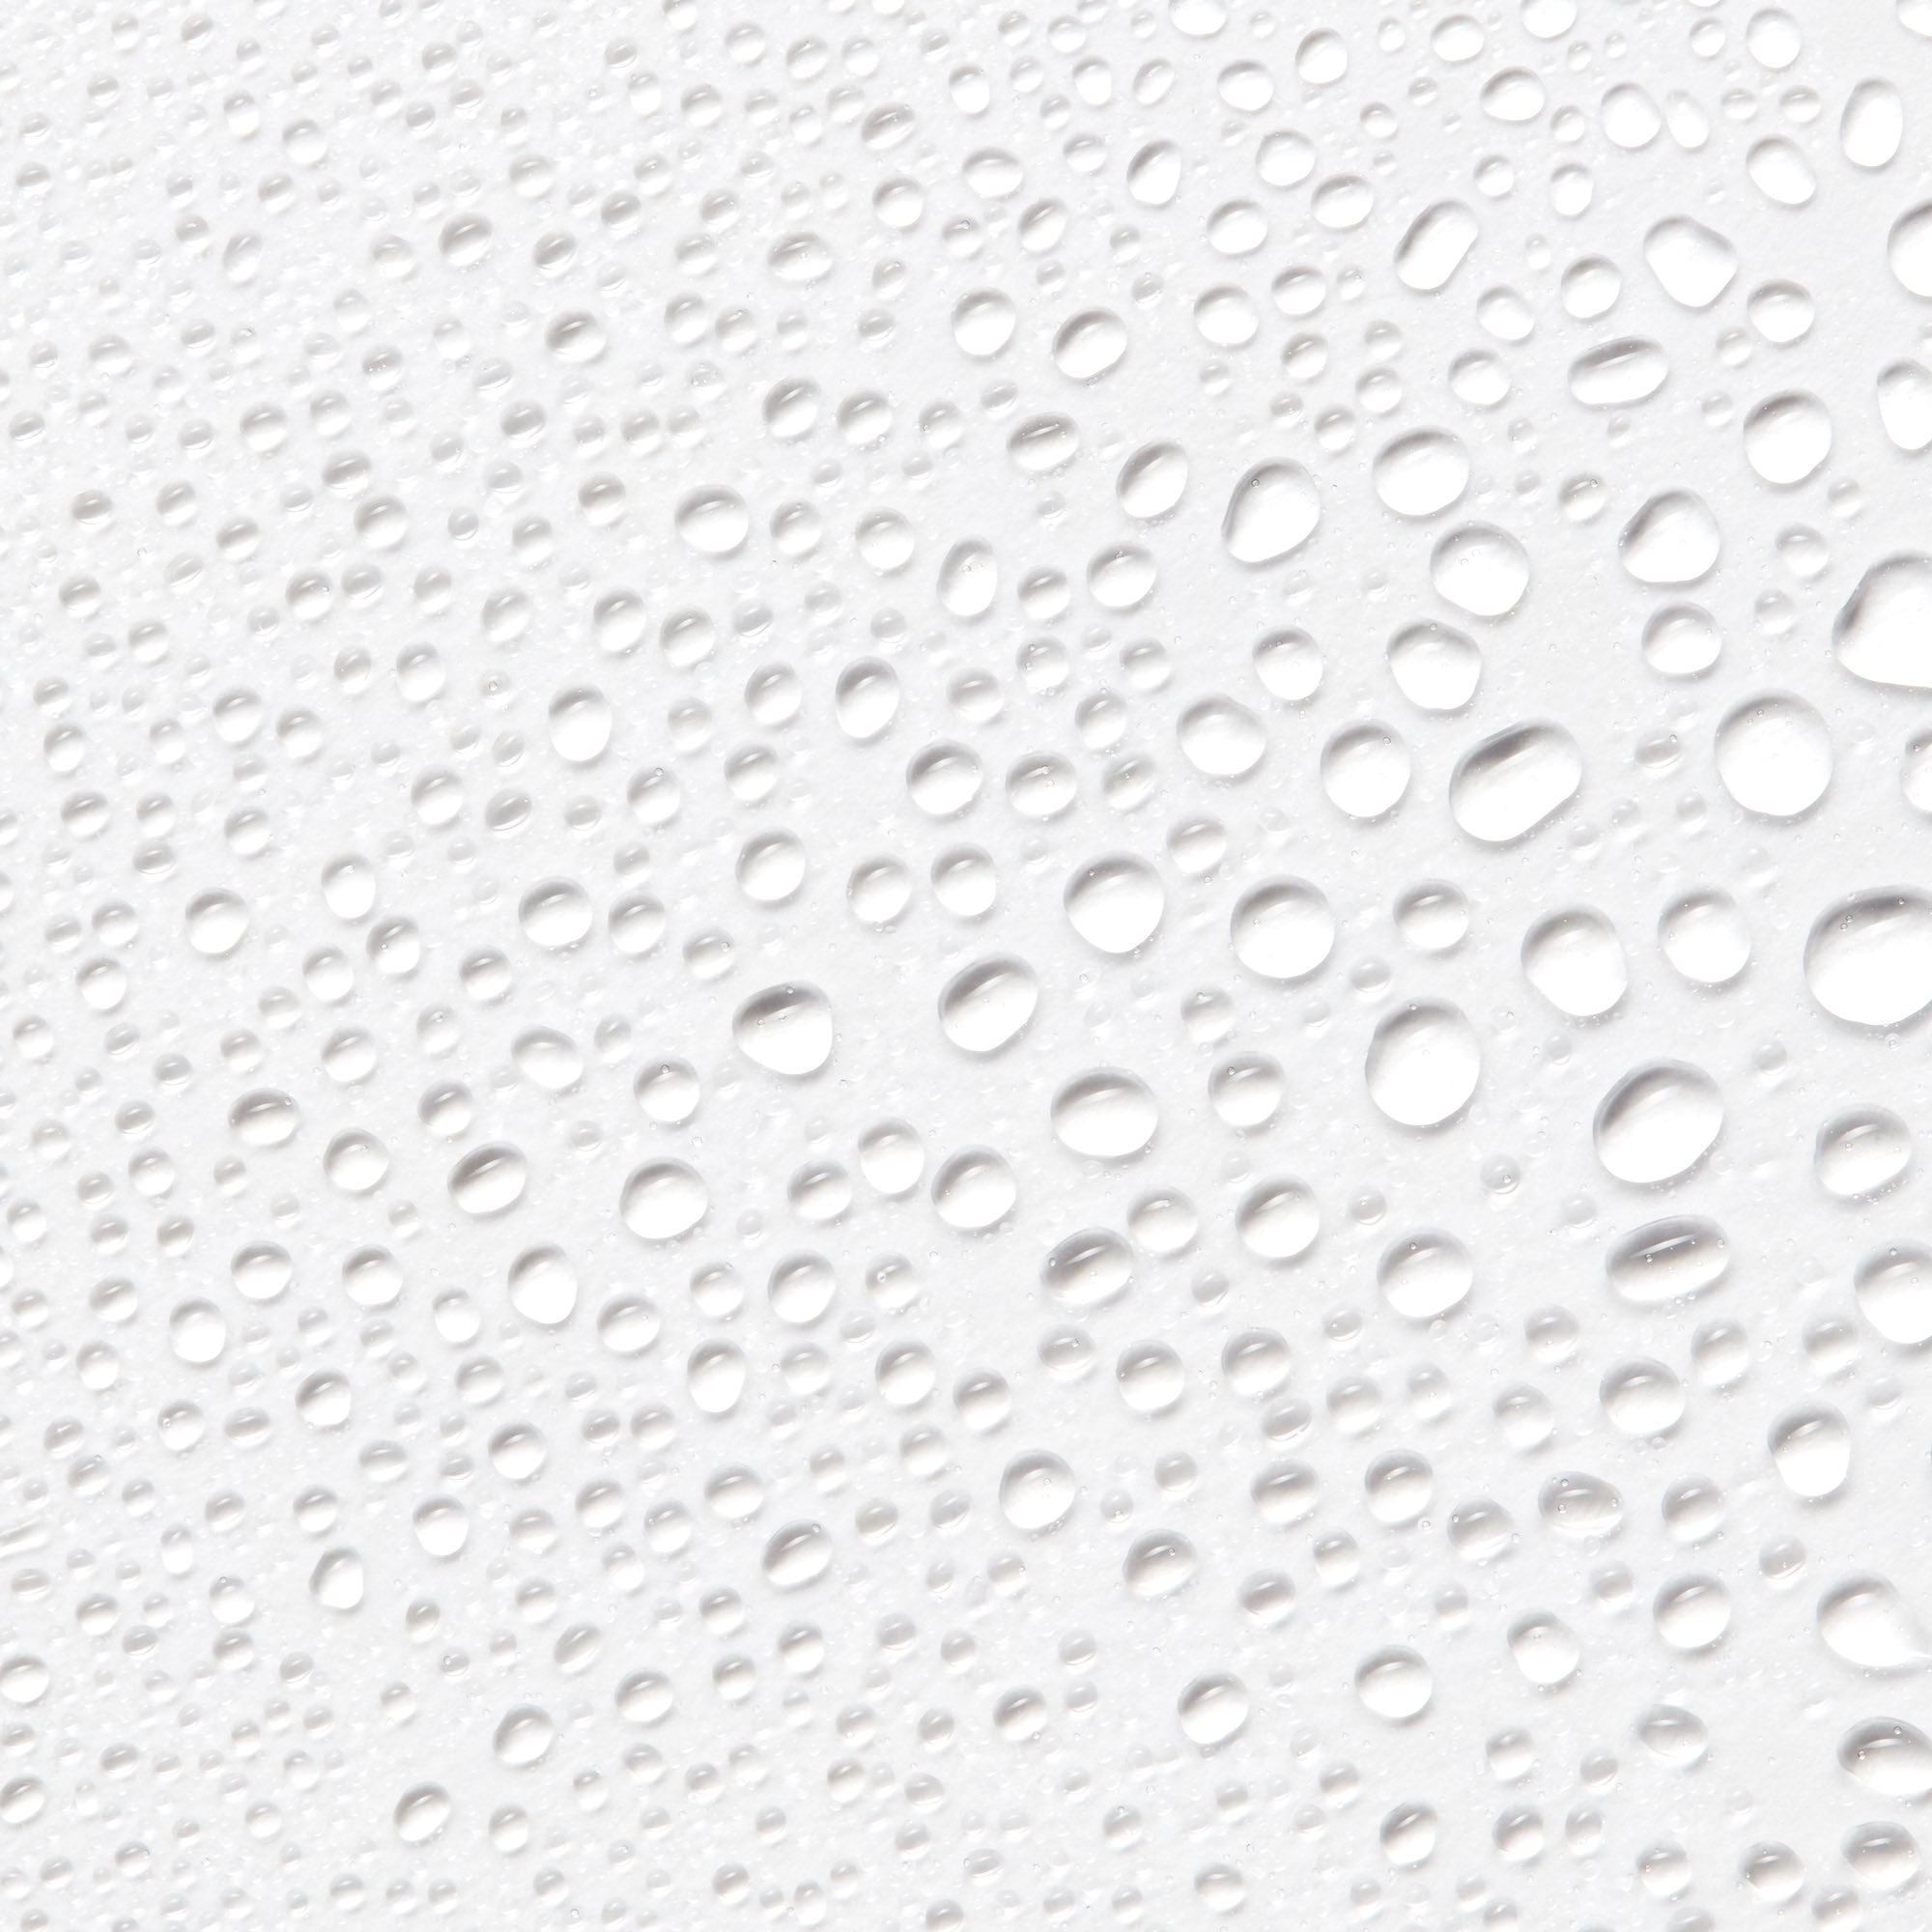 Close-up image of droplets from Antu Radiance Mist on a white background.